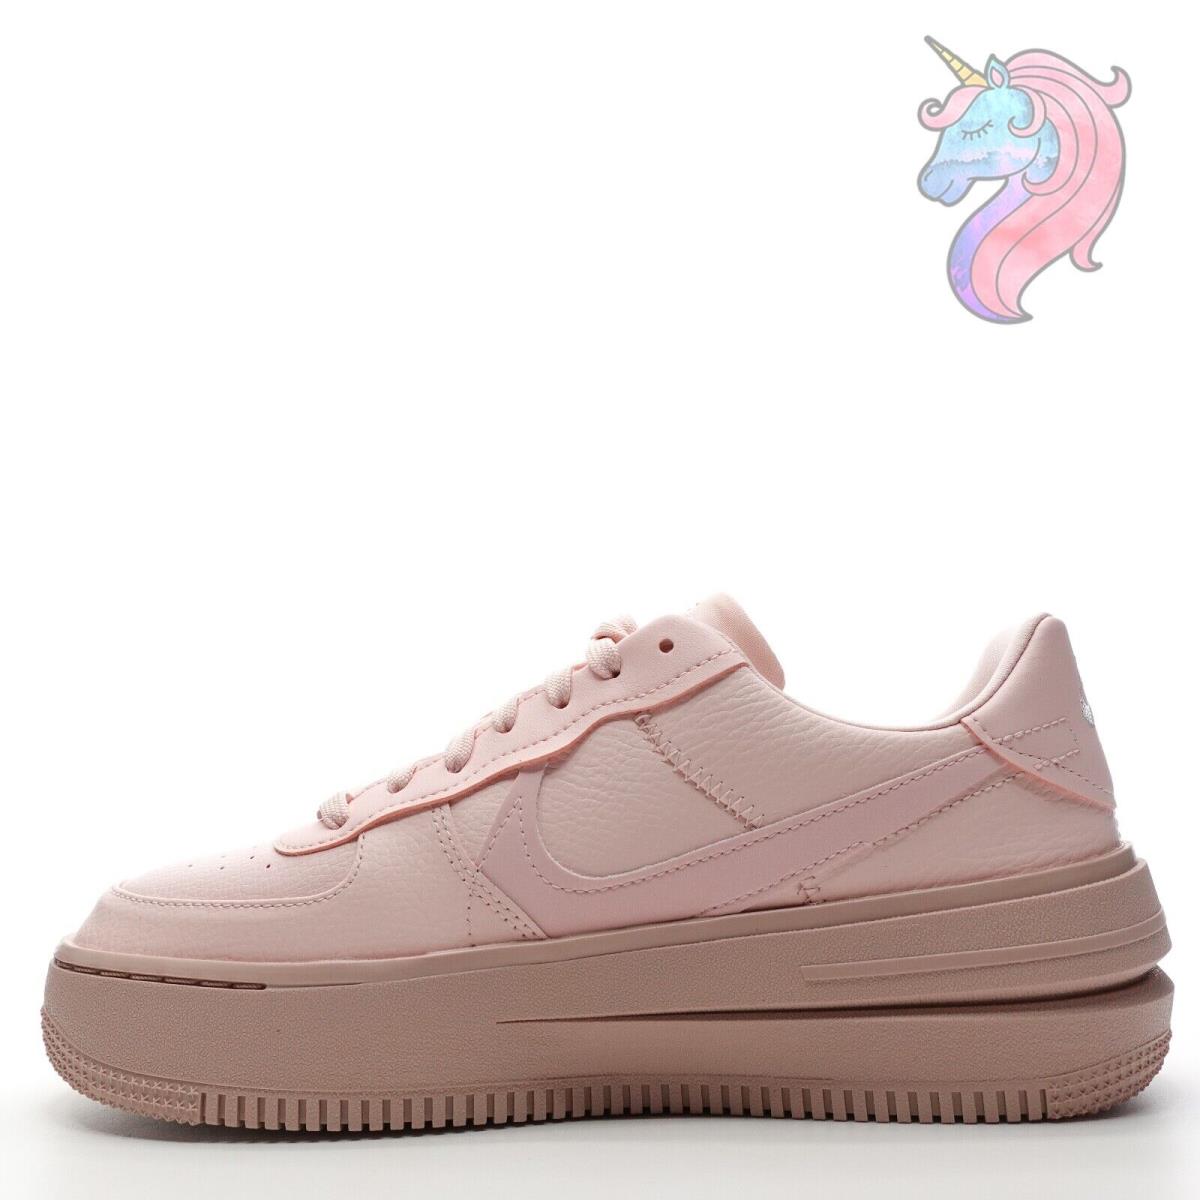 size 8 women's nike air force 1 shoes